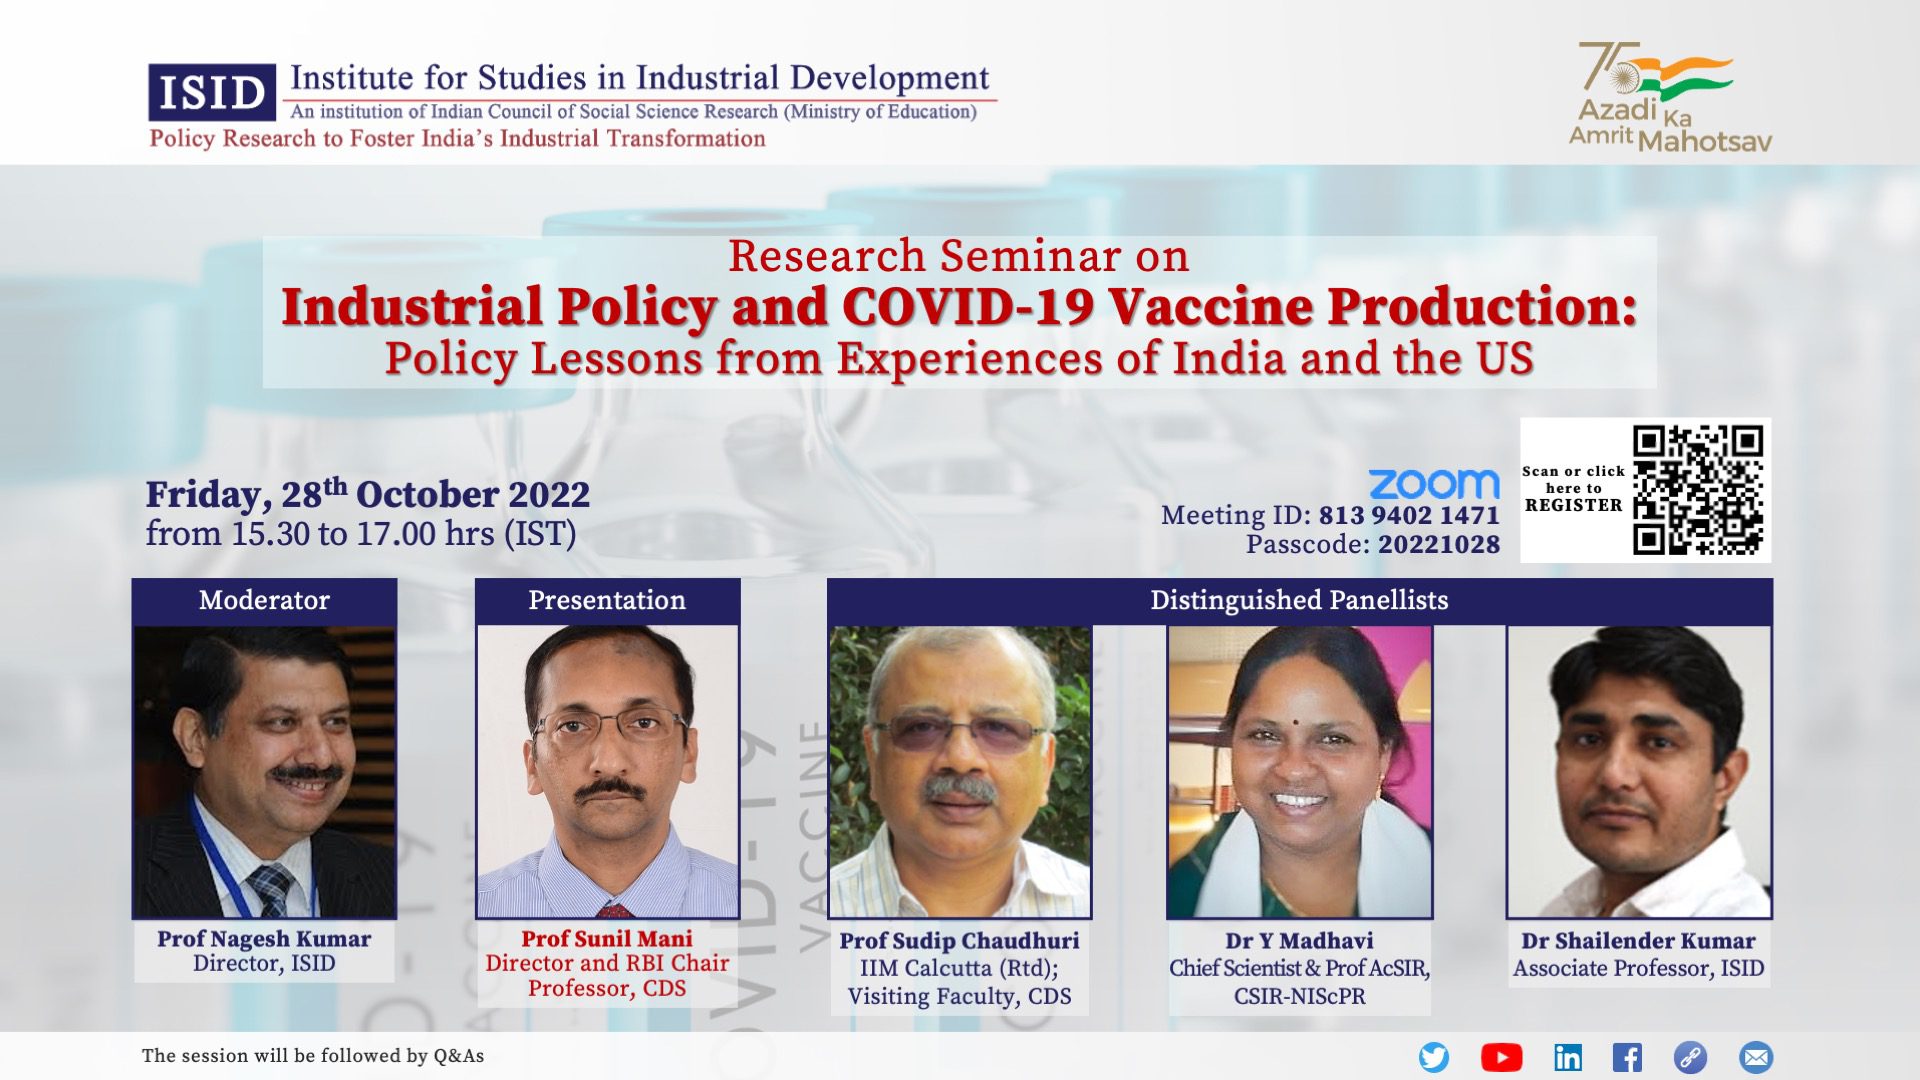 Research Seminar on Industrial Policy and COVID-19 Vaccine Production: Policy Lessons from Experiences of India and the US